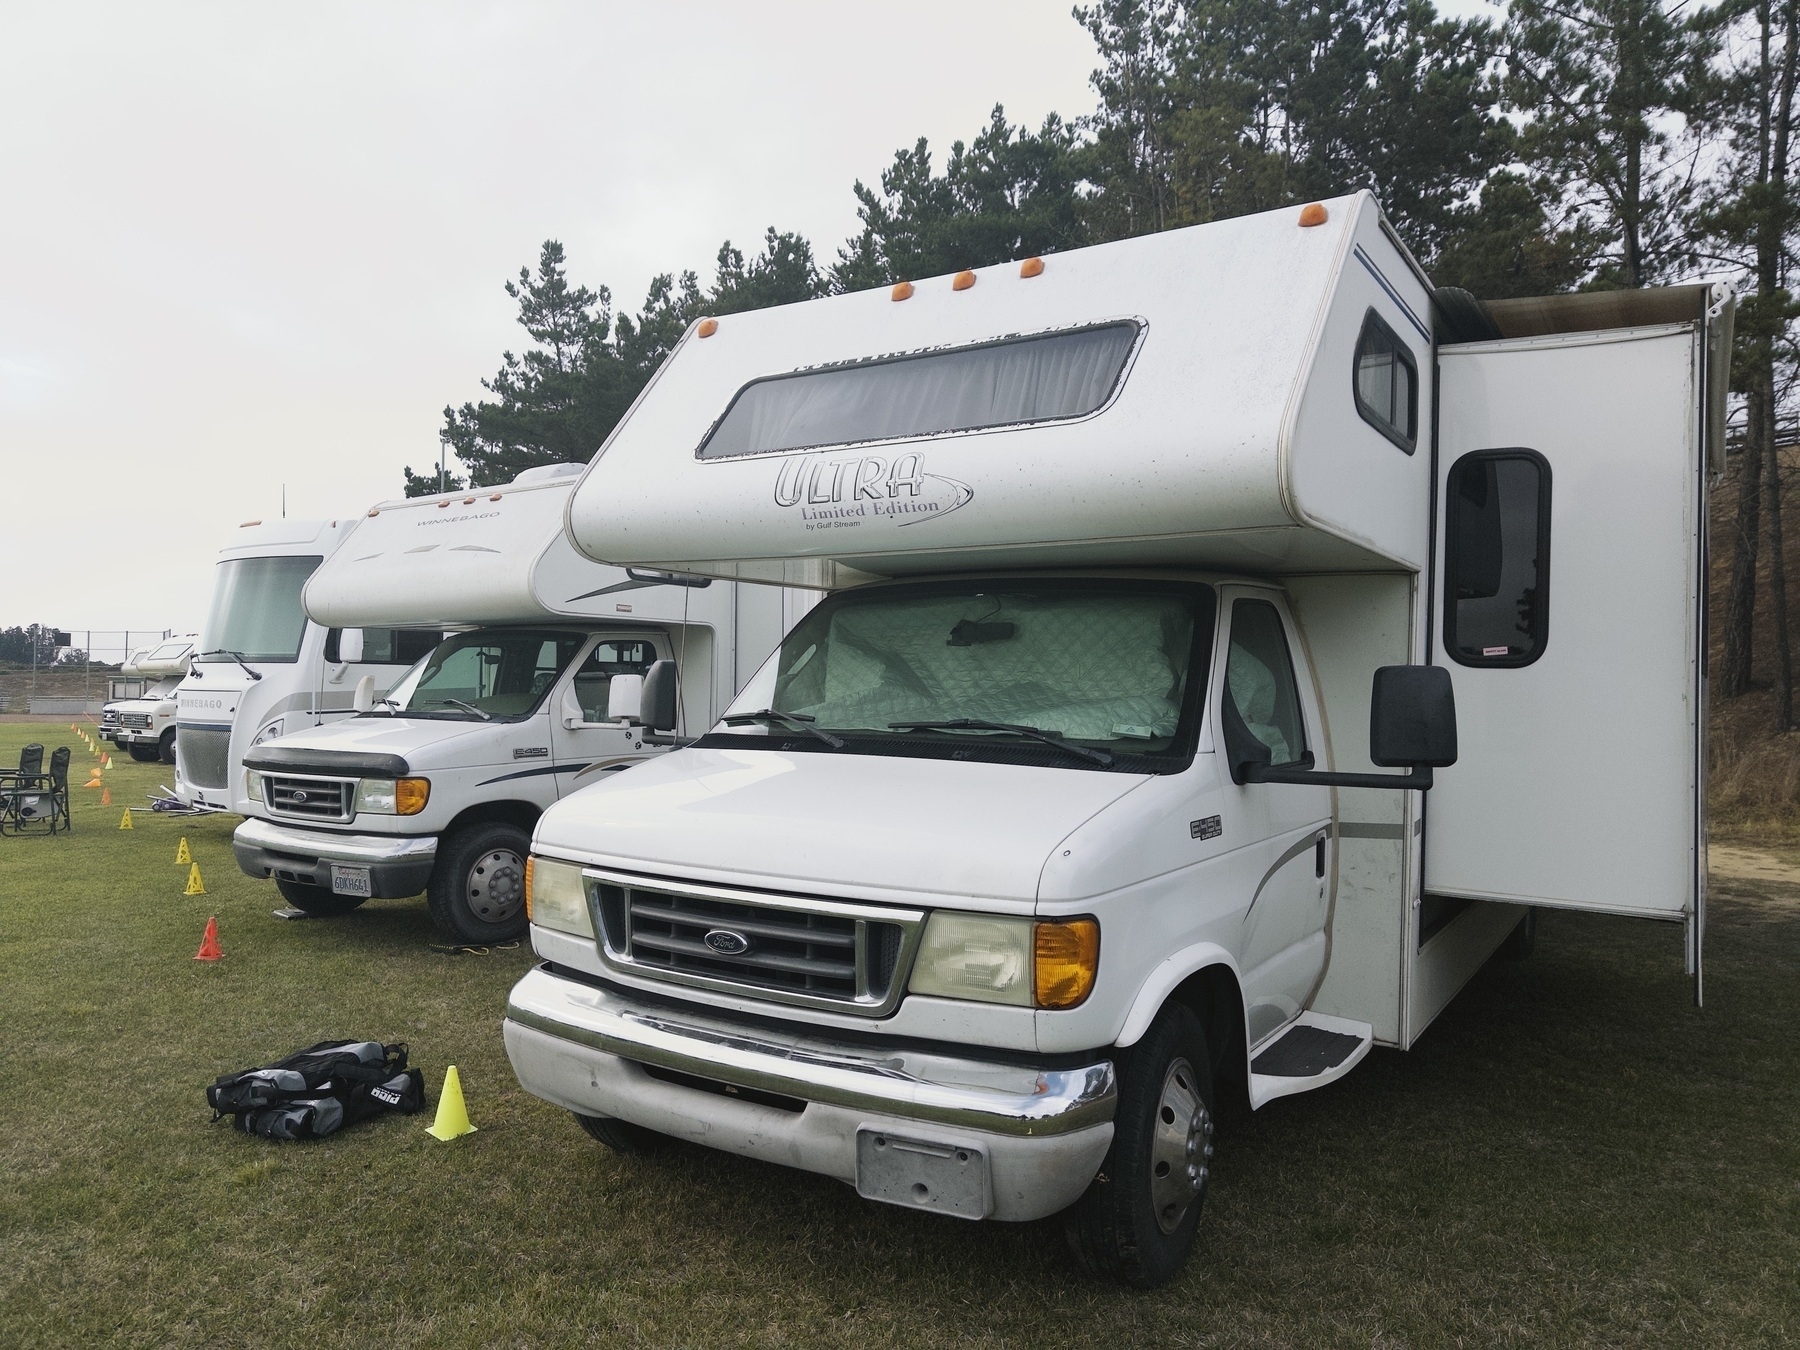 A row of RVs at a dog agility event.